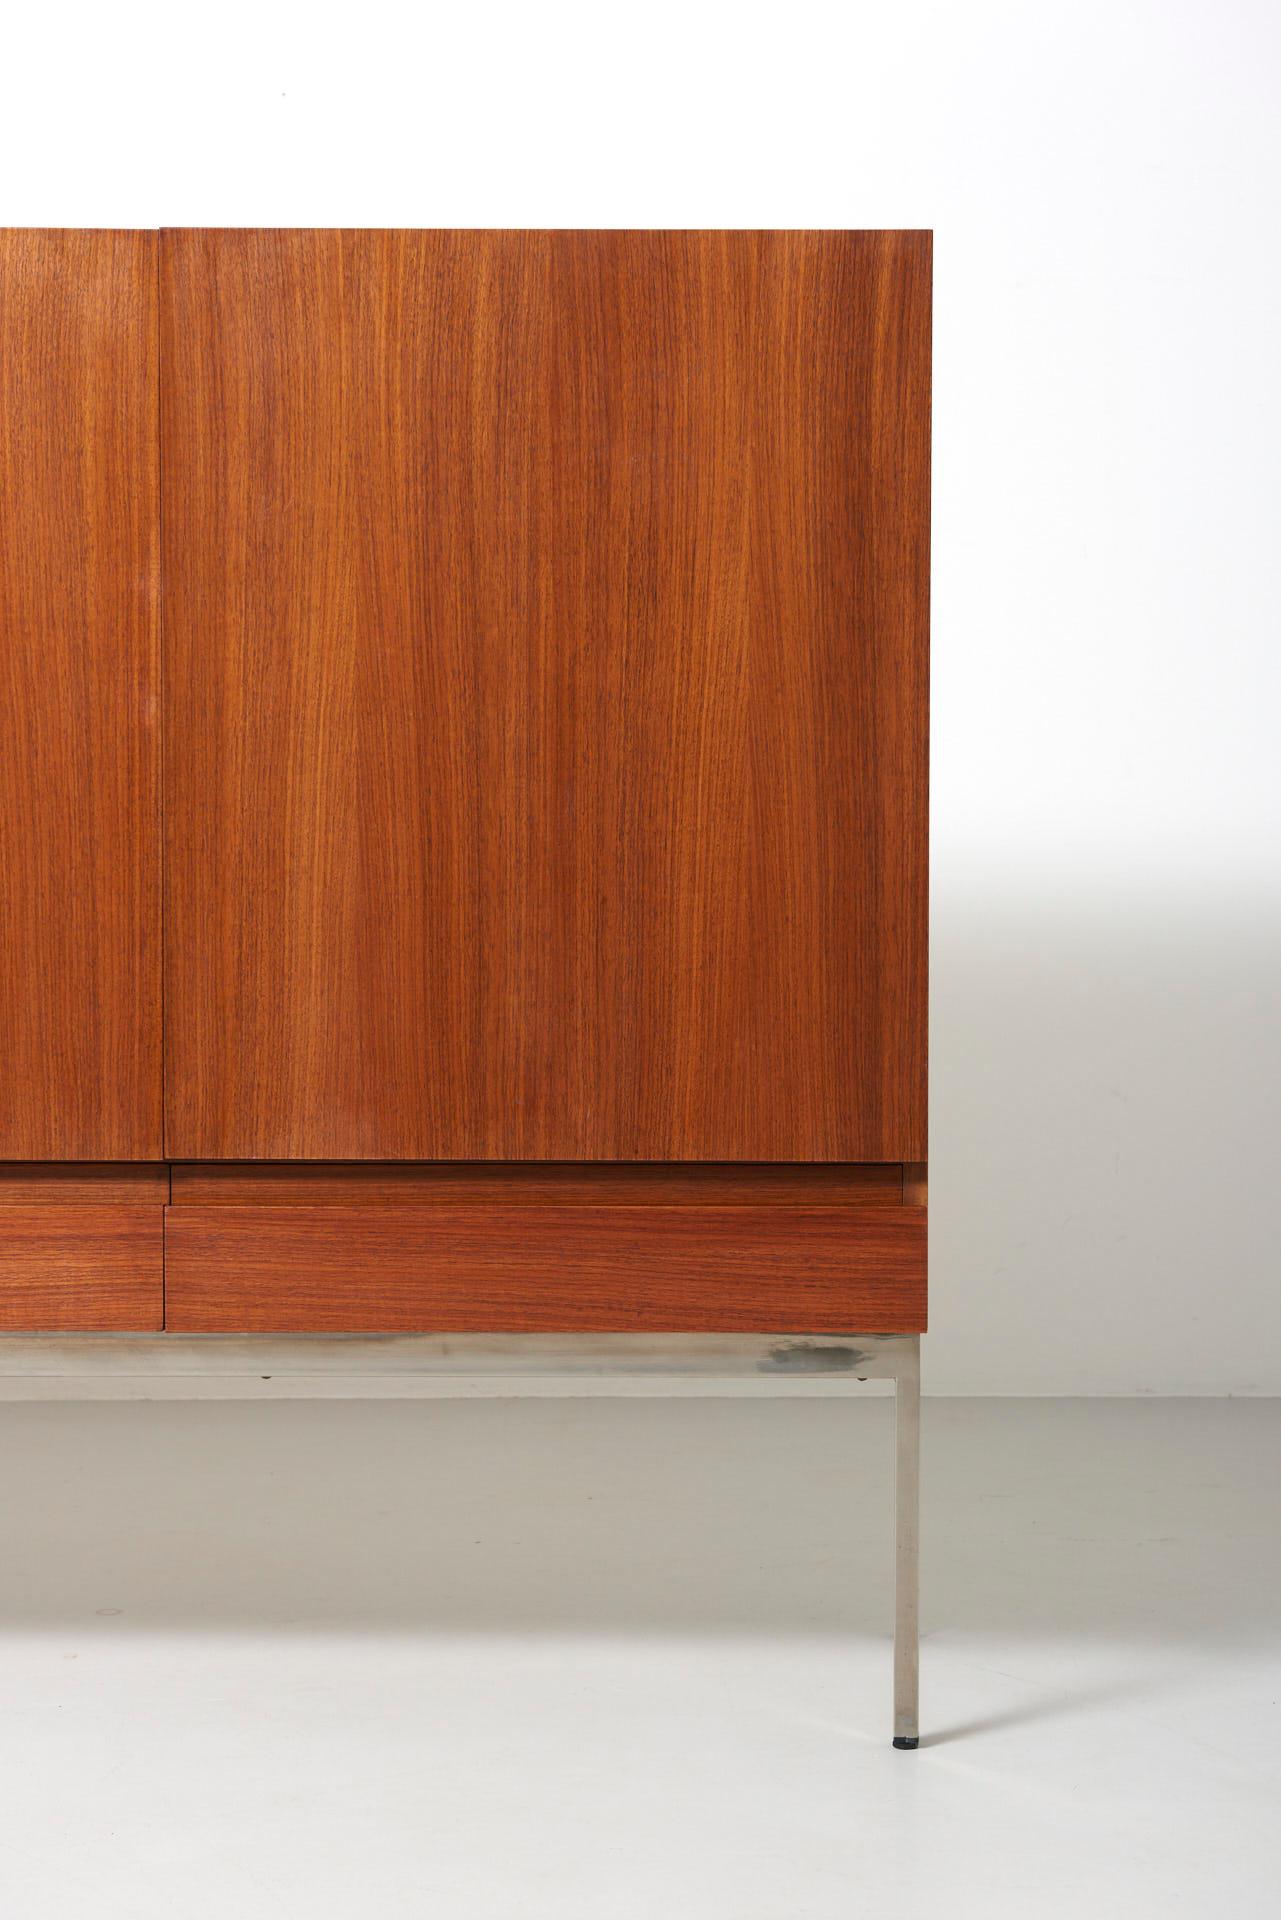 A B-60 sideboard in teak with chrome-plated frame. Design by Dieter Waeckerlin. Produced by Behr in Germany.